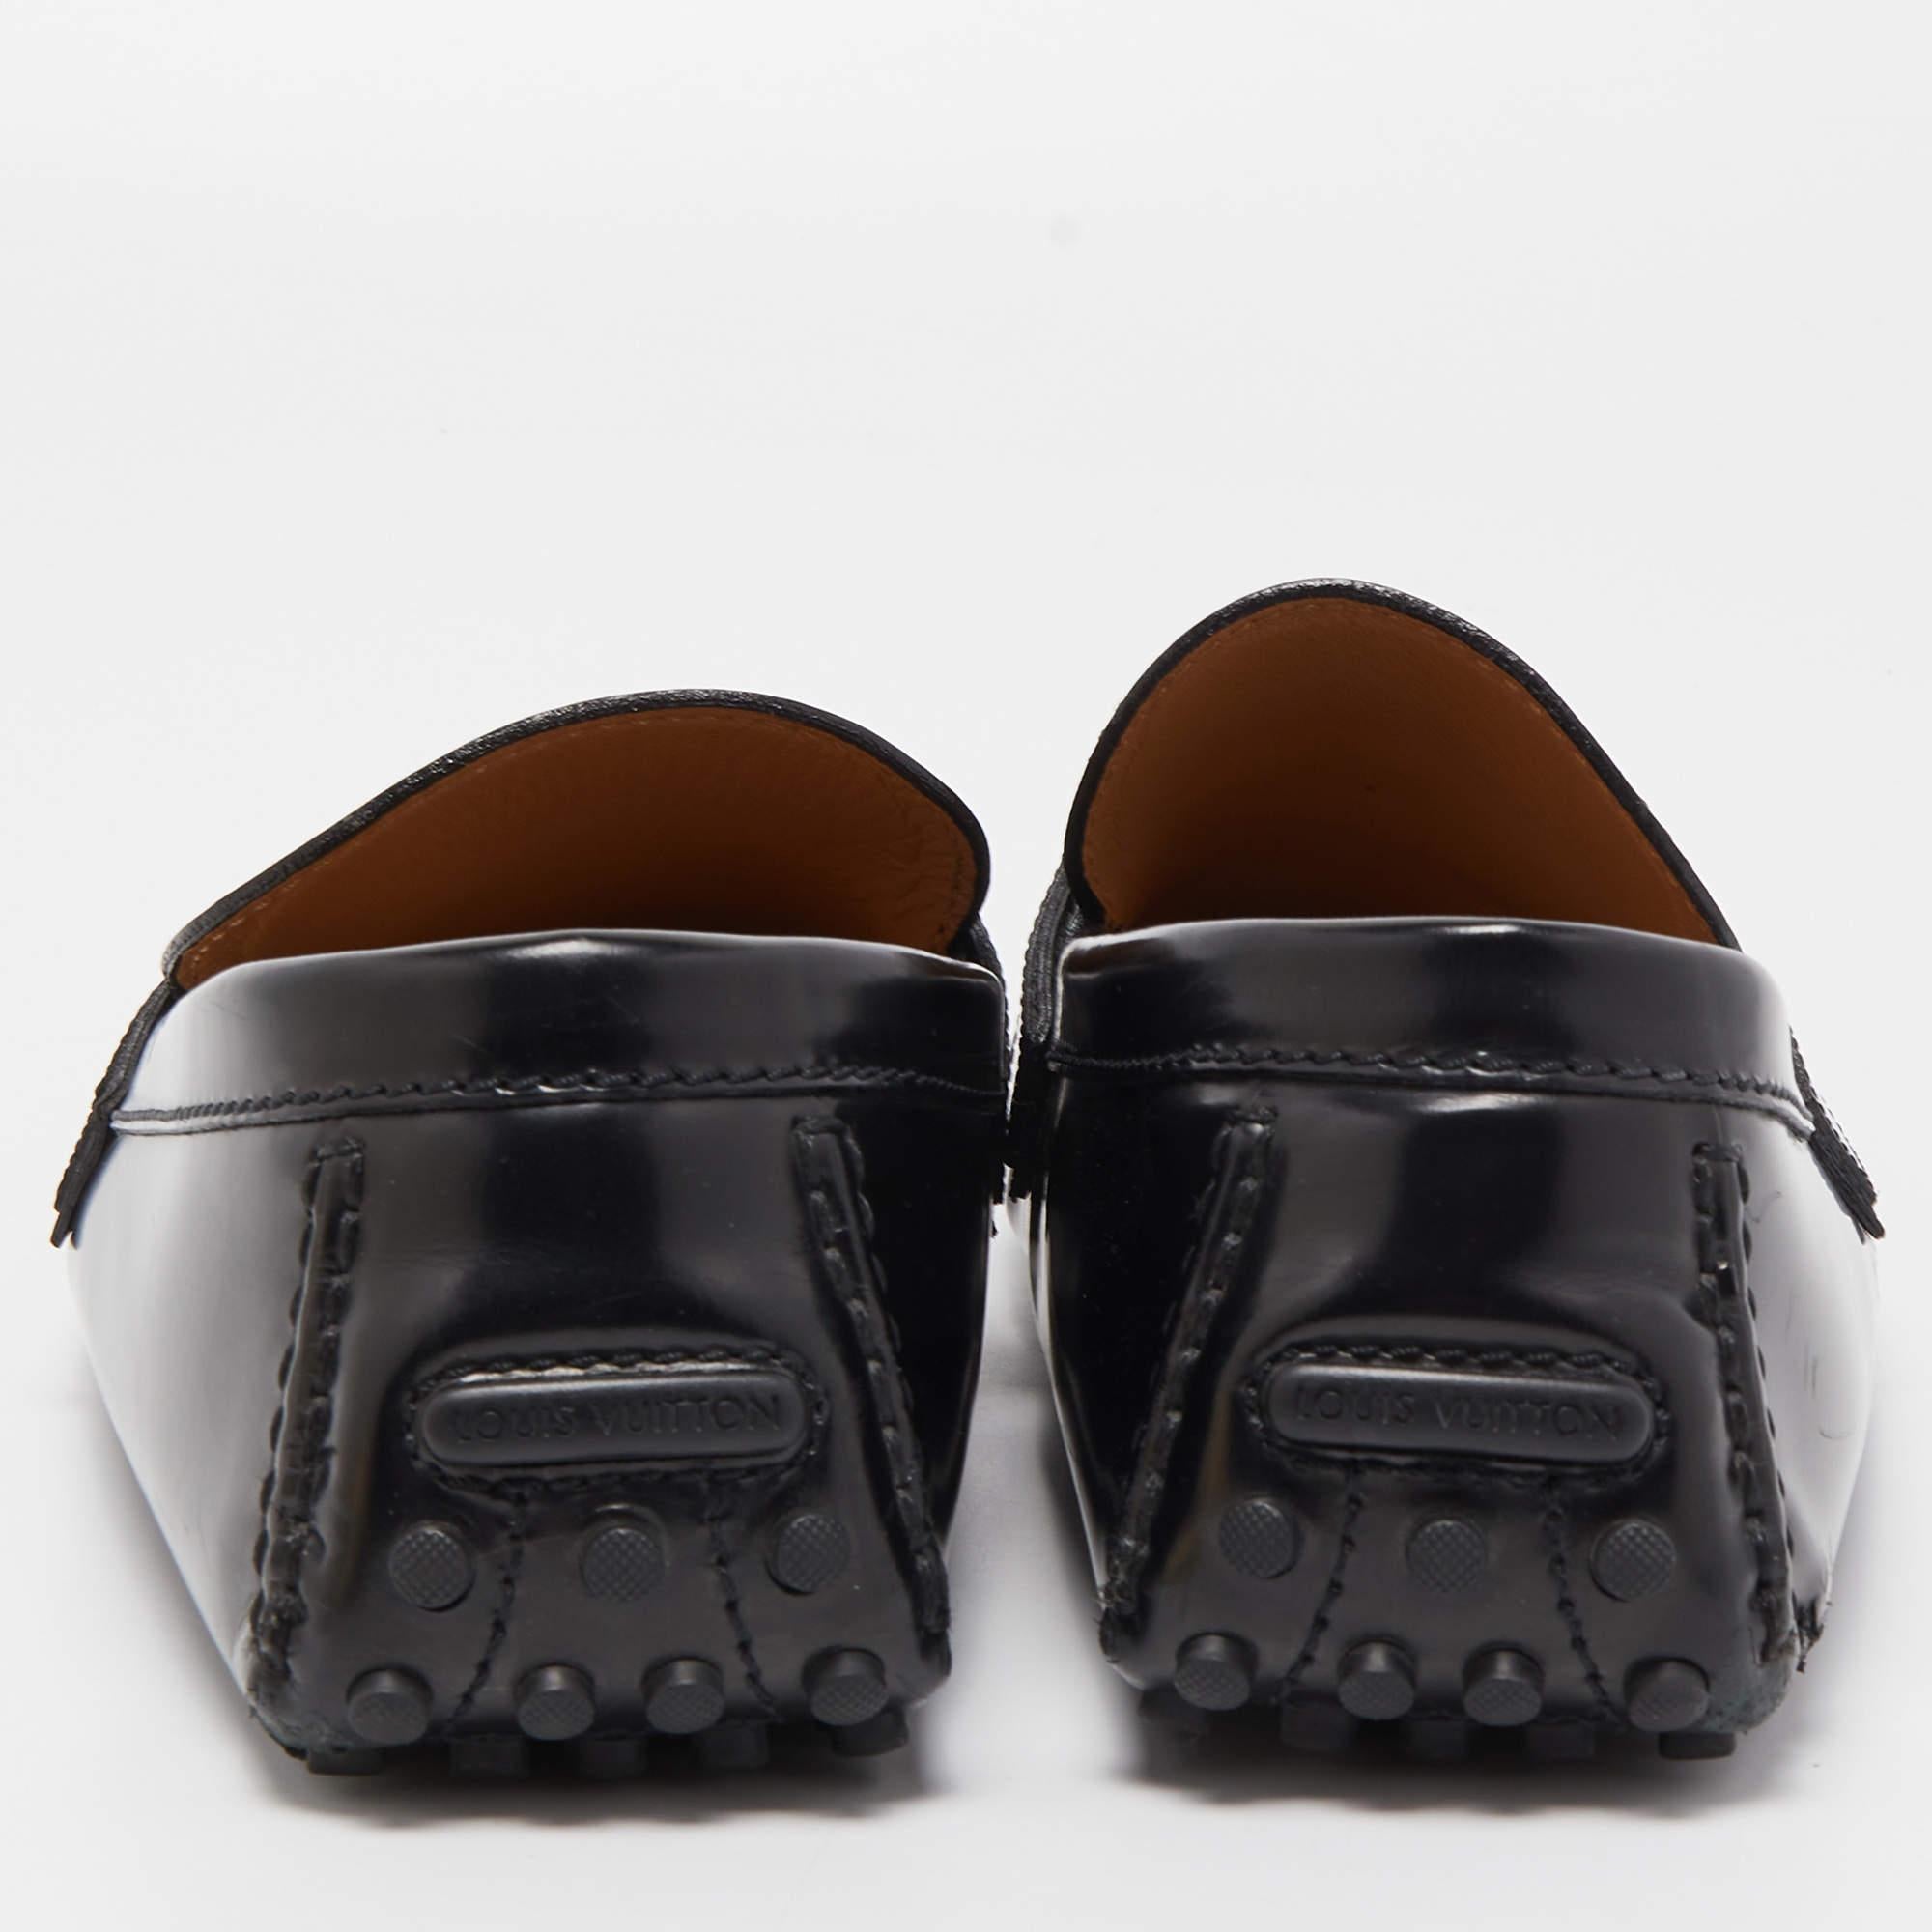 Practical, fashionable, and durable—these designer loafers are carefully built to be fine companions to your everyday style. They come made using the best materials to be a prized buy.

Includes: Original Dustbag